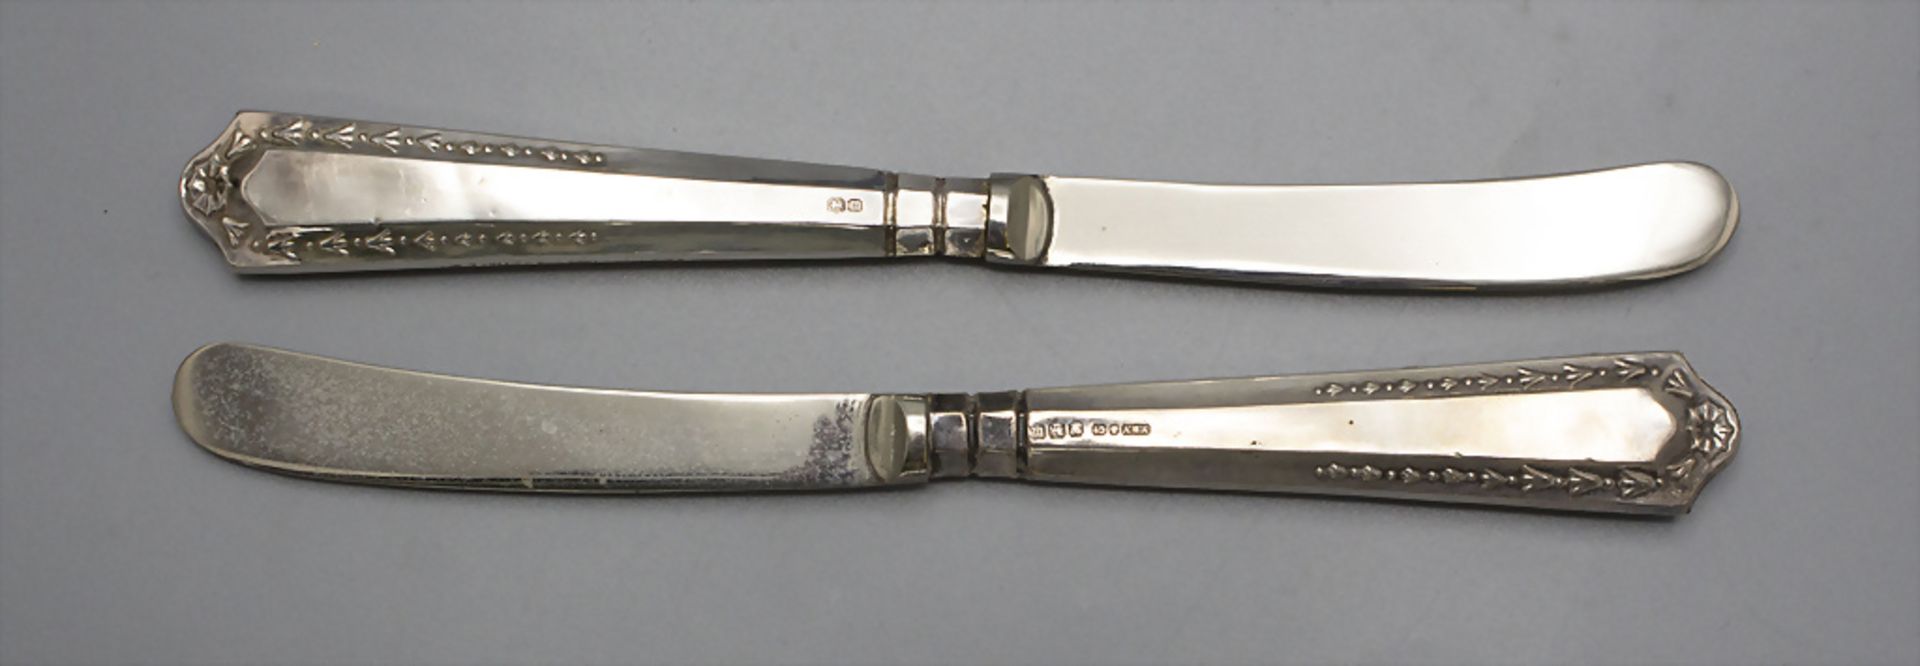 6 Buttermesser im Etui / A set of 6 butter knives in a box, V.B. Vickers & Co., Sheffield, 1929 - Image 2 of 4